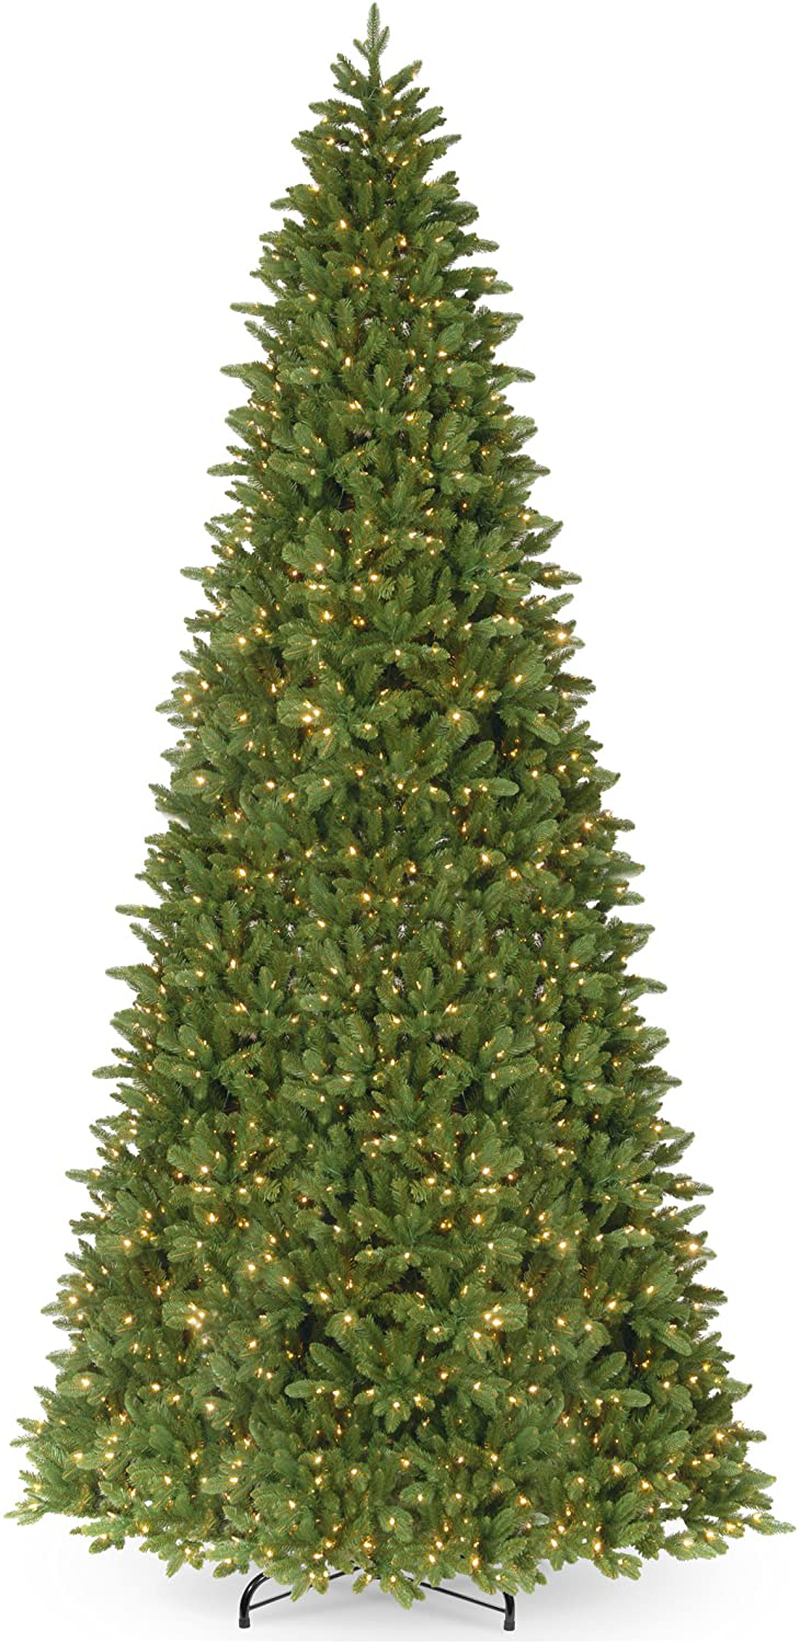 National Tree Company 'Feel Real' Pre-lit Artificial Christmas Tree | Includes Pre-strung White Lights and Stand | Ridgewood Spruce Slim - 14 ft